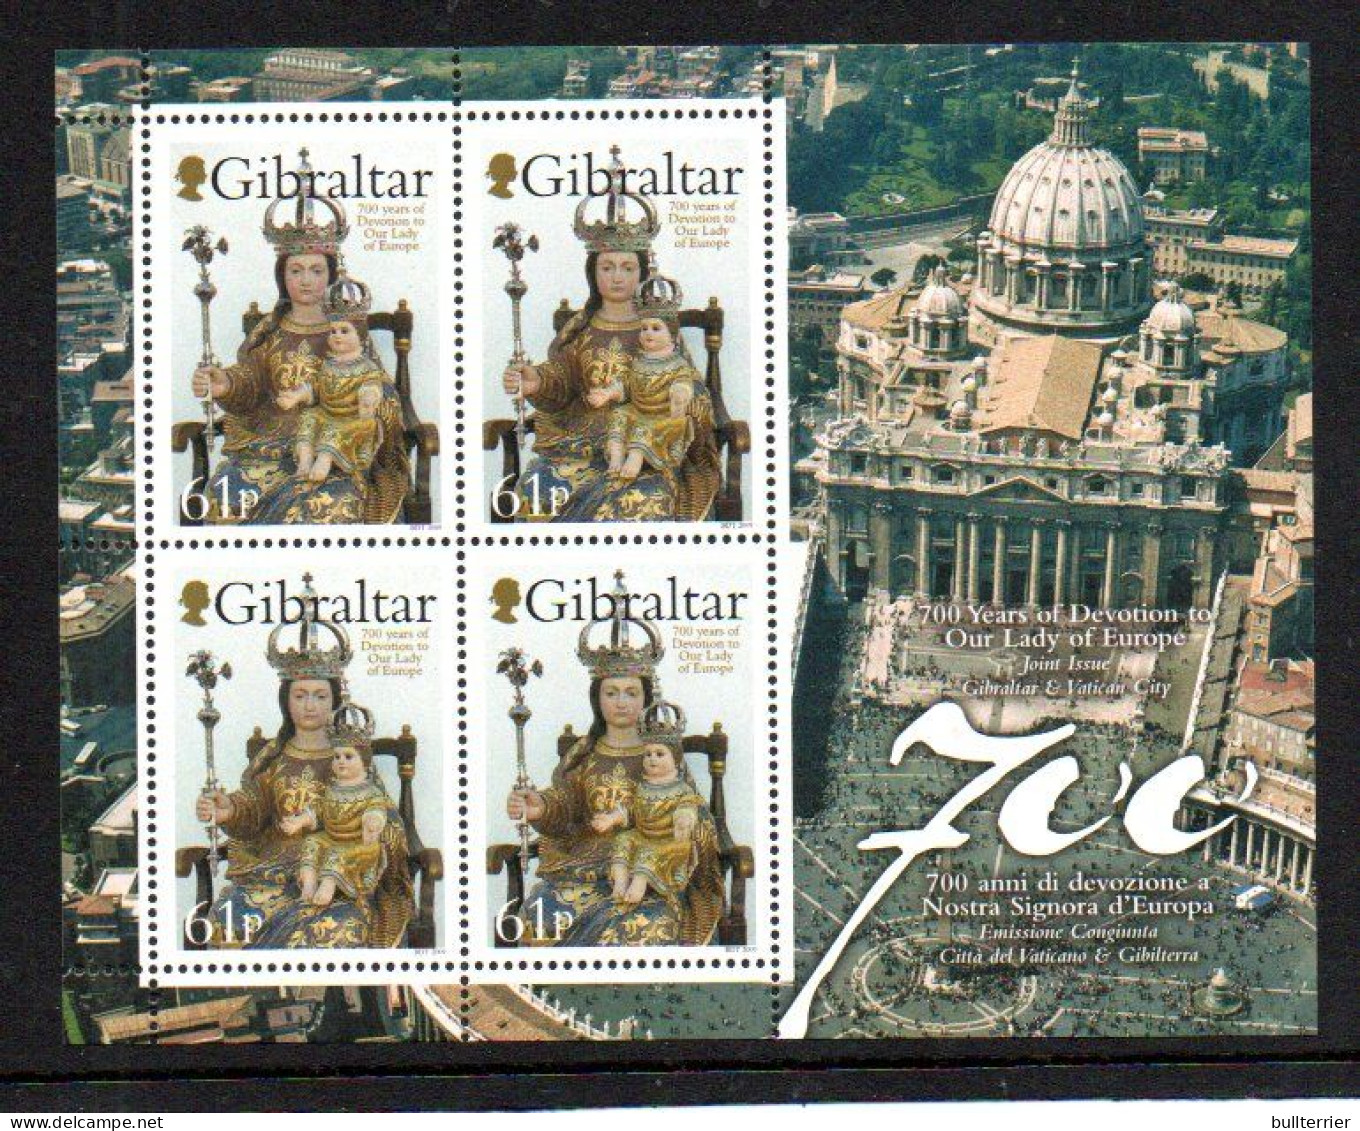 GIBRALTAR - 2009 - OUR LADY OF EUROPE SHEETLET OF 4  MINT NEVER HINGED  SG CAT £14 - Gibraltar